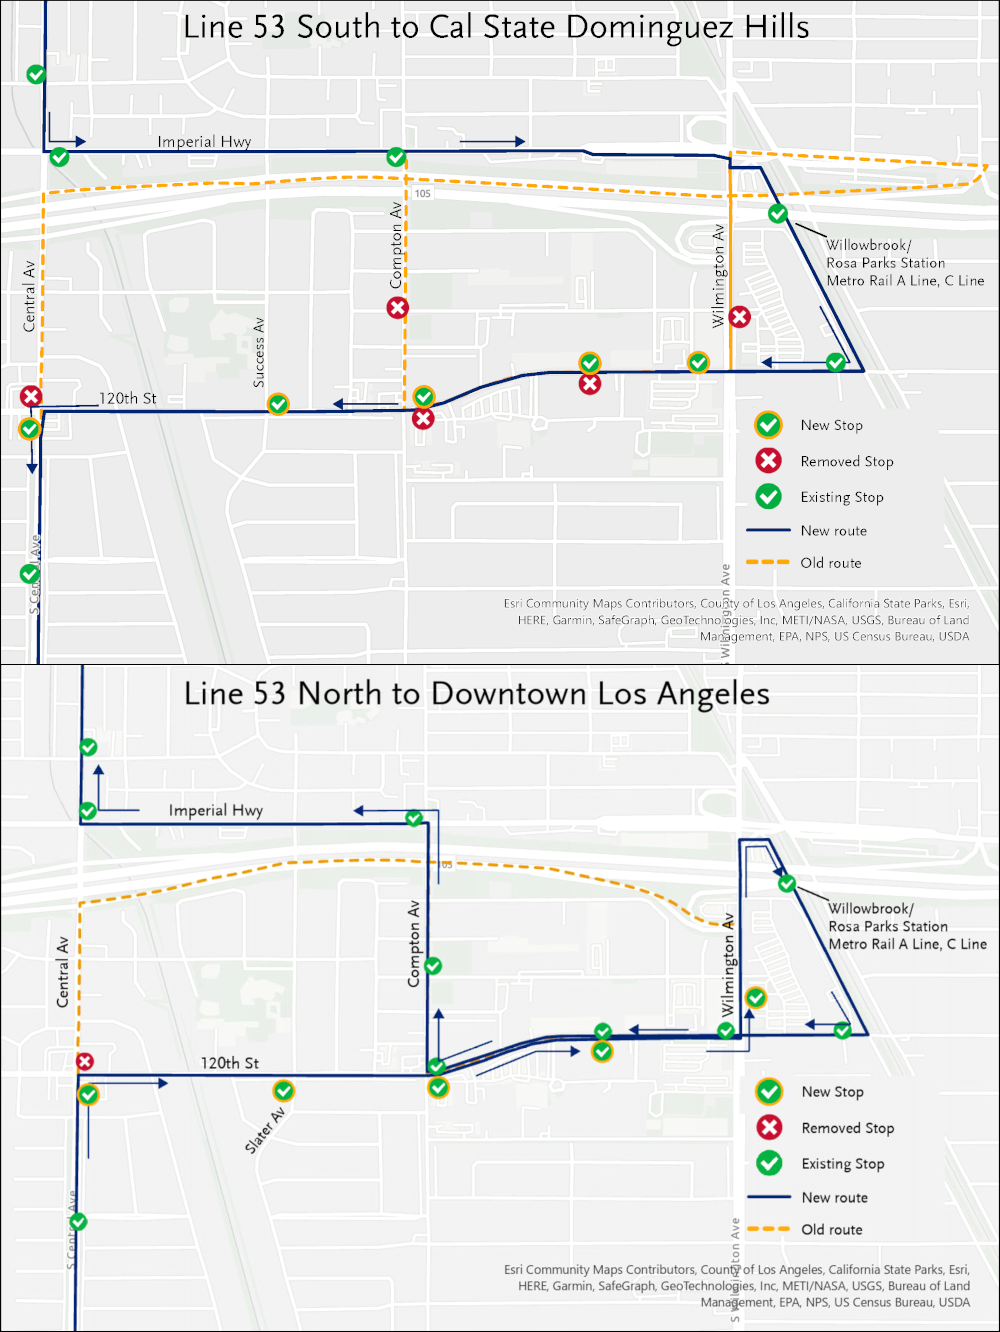 a graphic map showing a visual representation of the described changes to Line 53